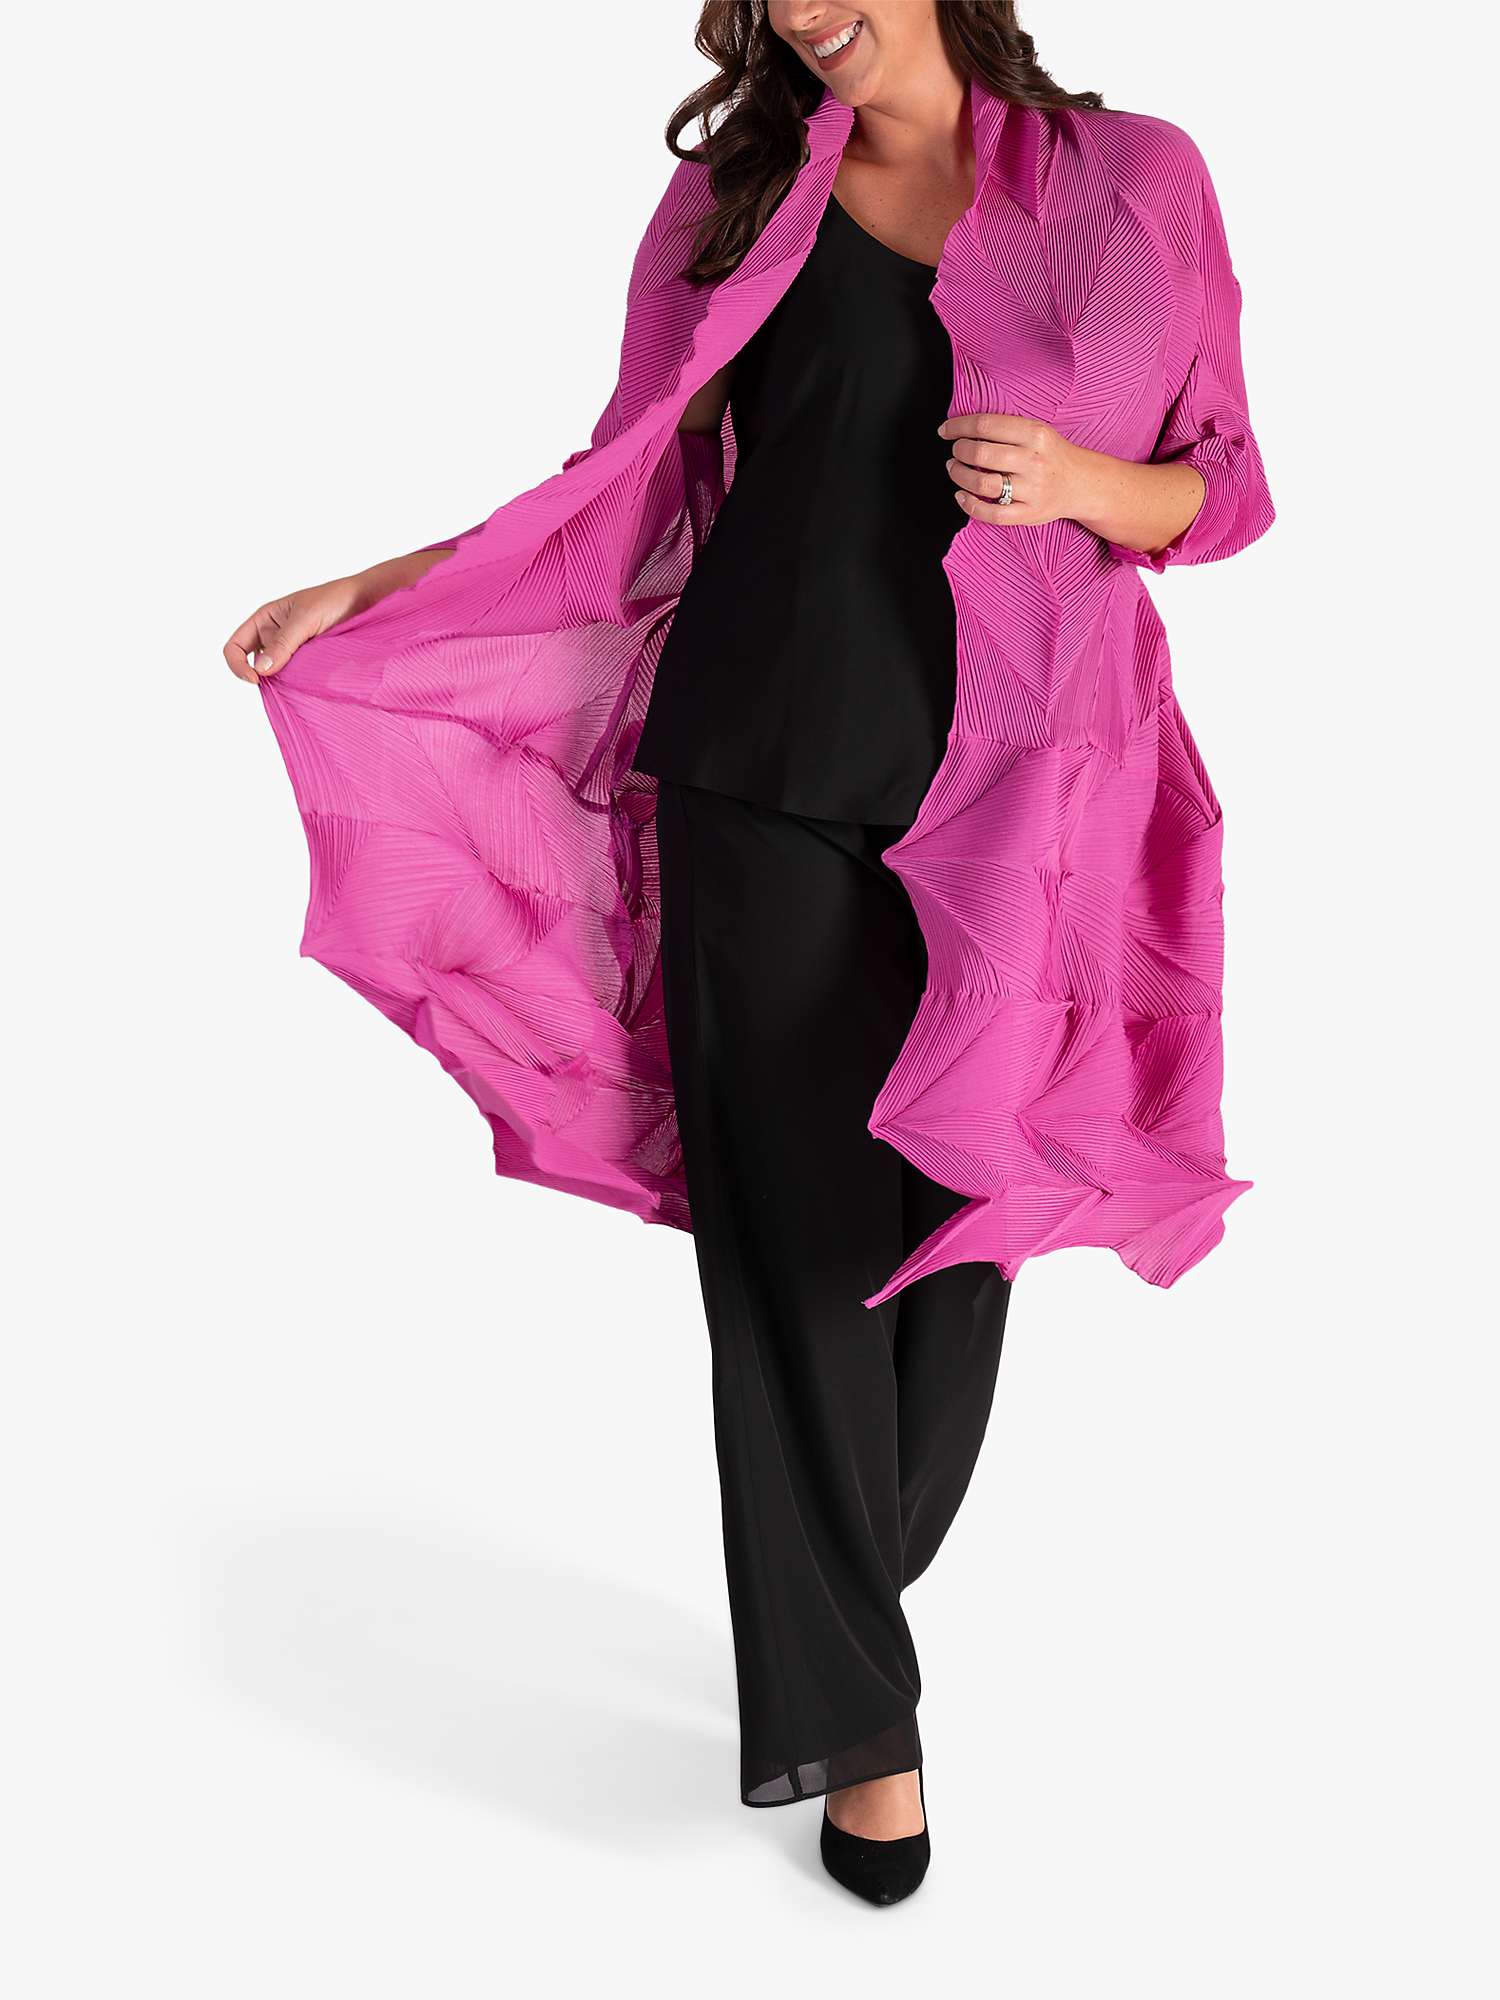 Buy chesca Fuschia 3-D Pleated Long Shrug Online at johnlewis.com